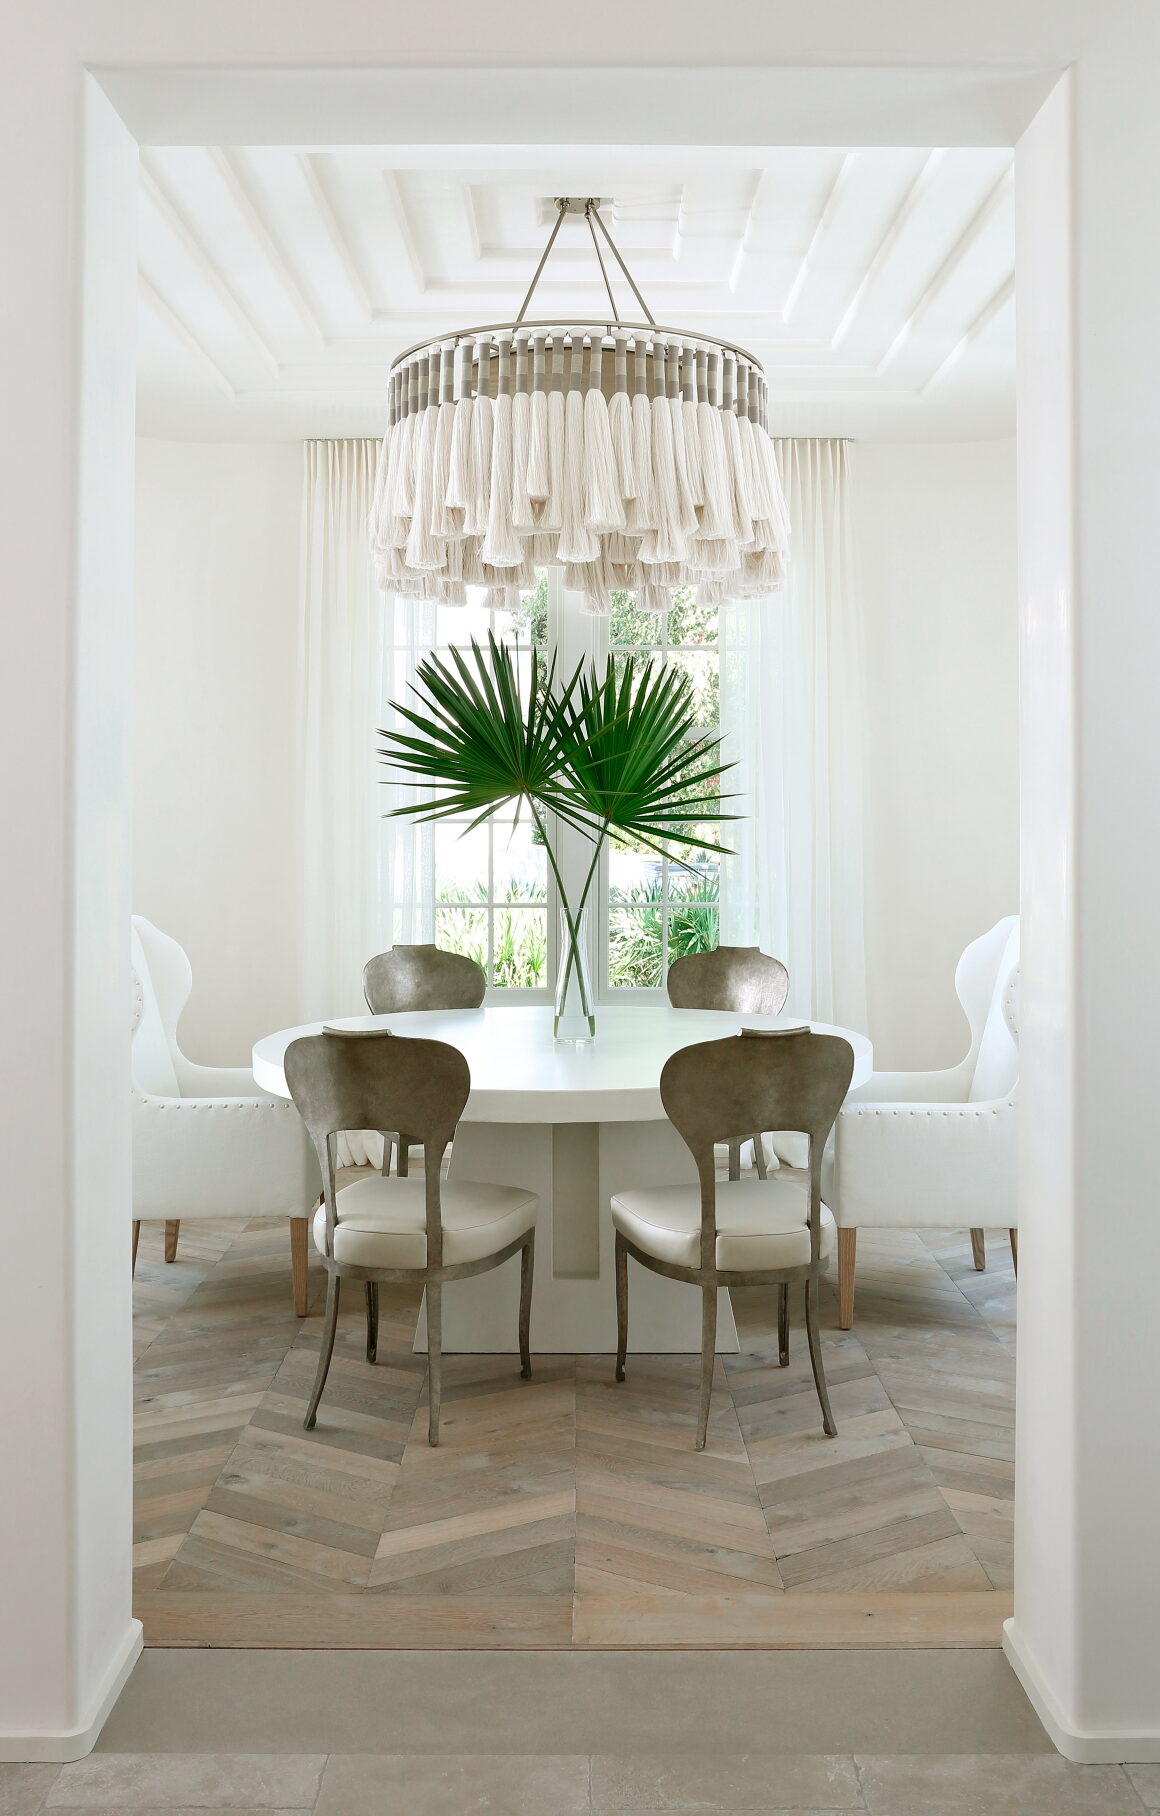 M2C Studio's Dawn chandelier used in Rozanne Jackson's interior design at Aly Beach. (Photographed by Chris Little)